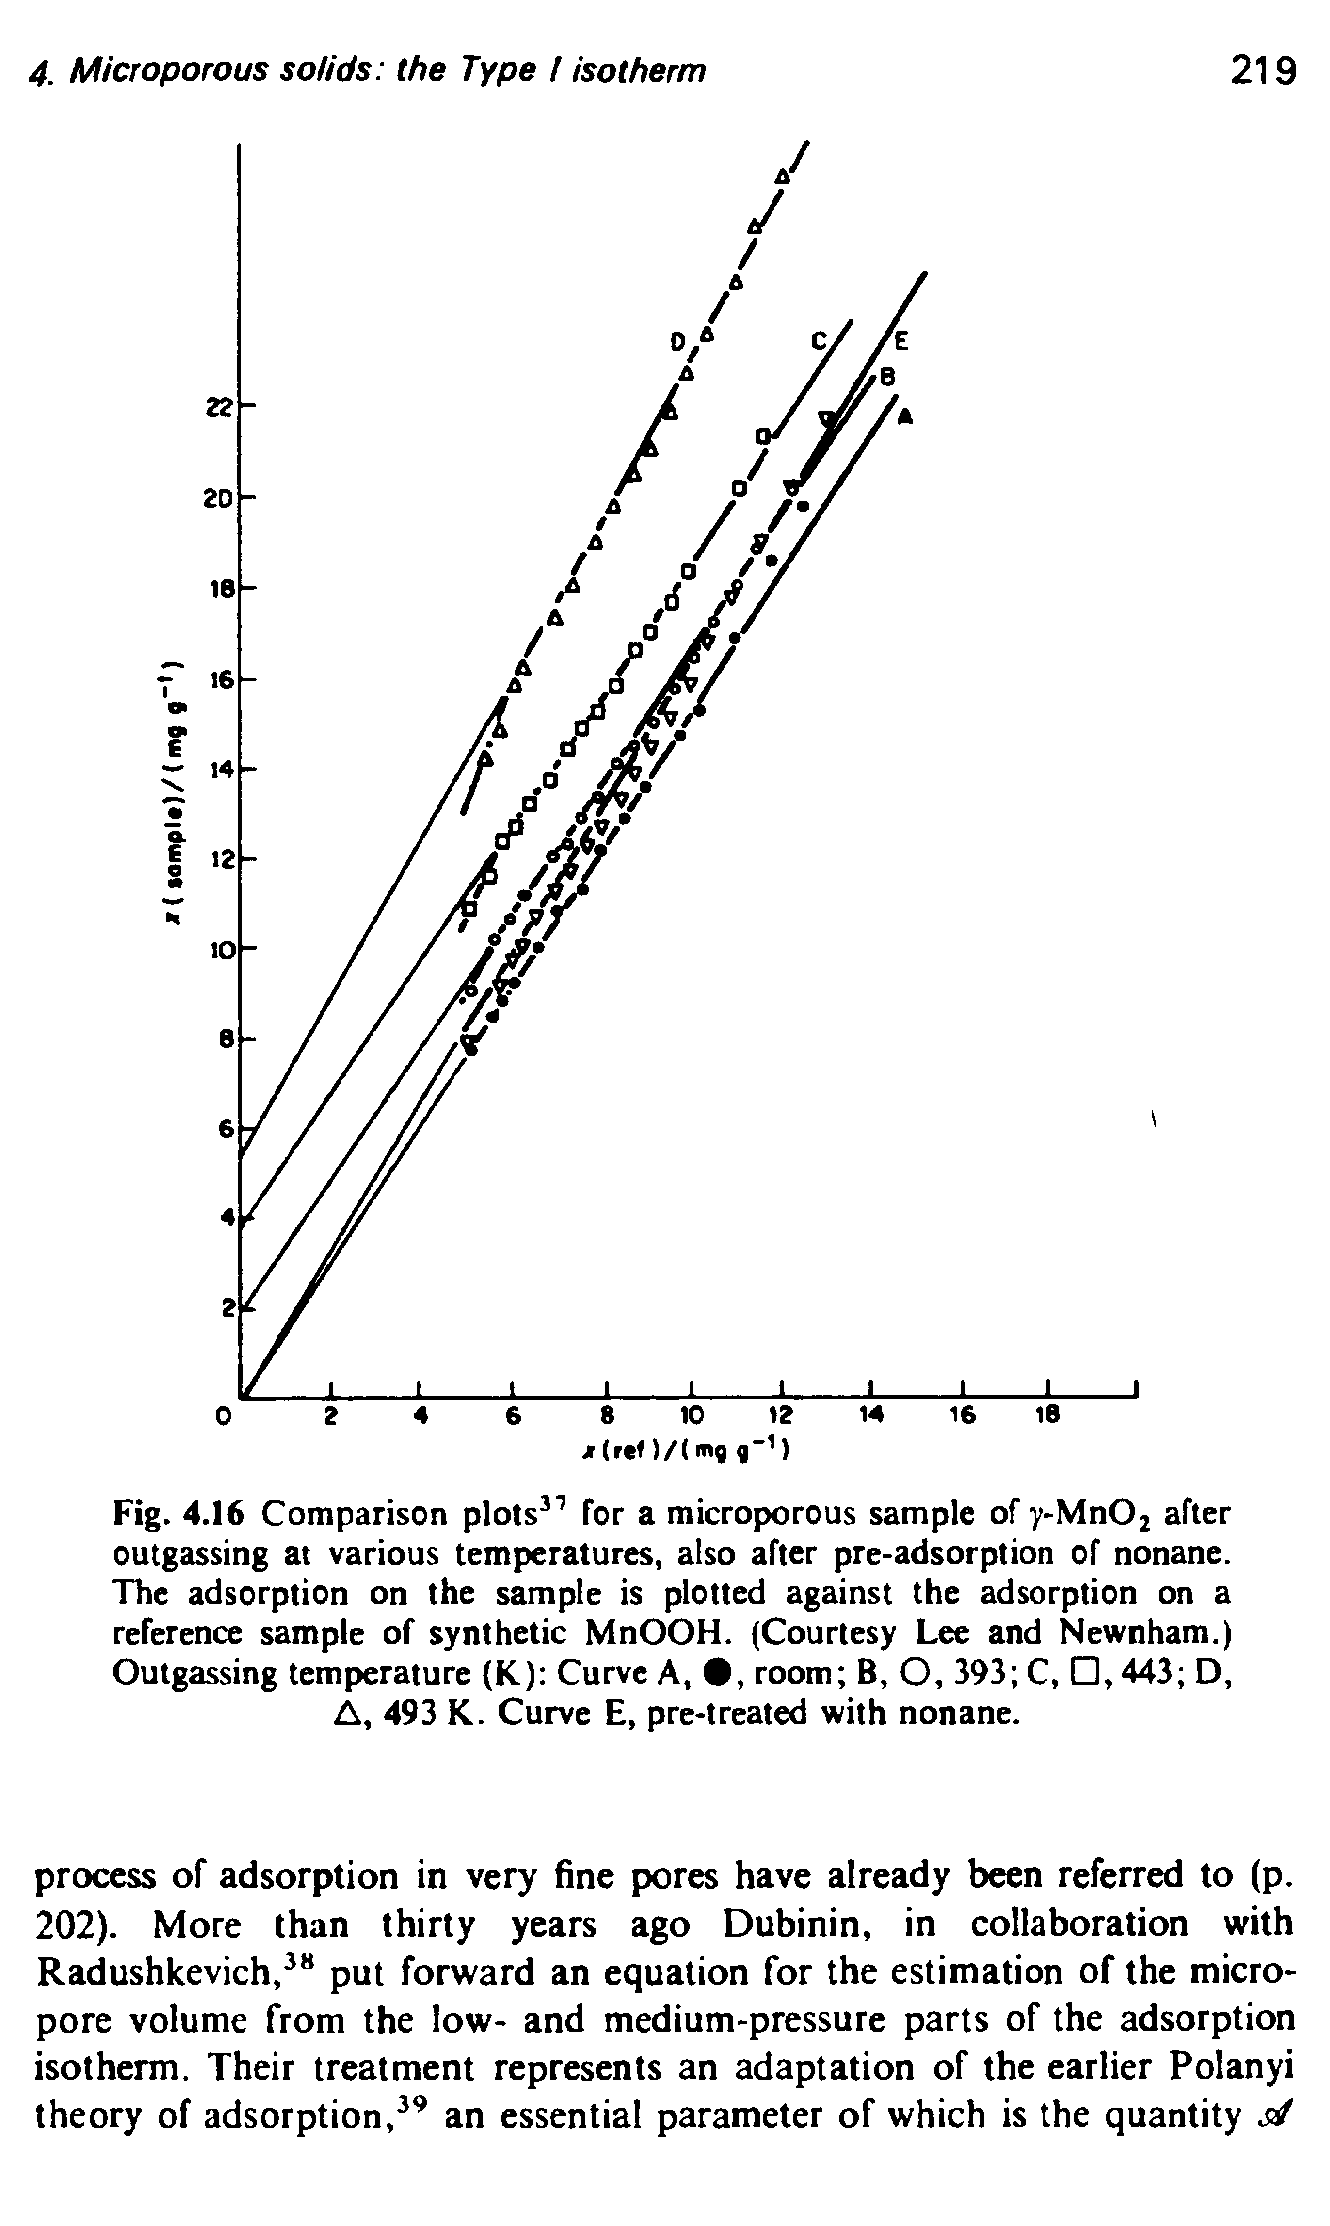 Fig. 4.16 Comparison plots for a microporous sample of y-Mn02 after outgassing at various temperatures, also after pre-adsorption of nonane. The adsorption on the sample is plotted against the adsorption on a reference sample of synthetic MnOOH. (Courtesy Lee and Newnham.) Outgassing temperature (K) Curve A, 9, room B, O, 393 C, , 443 D, A, 493 K. Curve E, pre-treated with nonane.